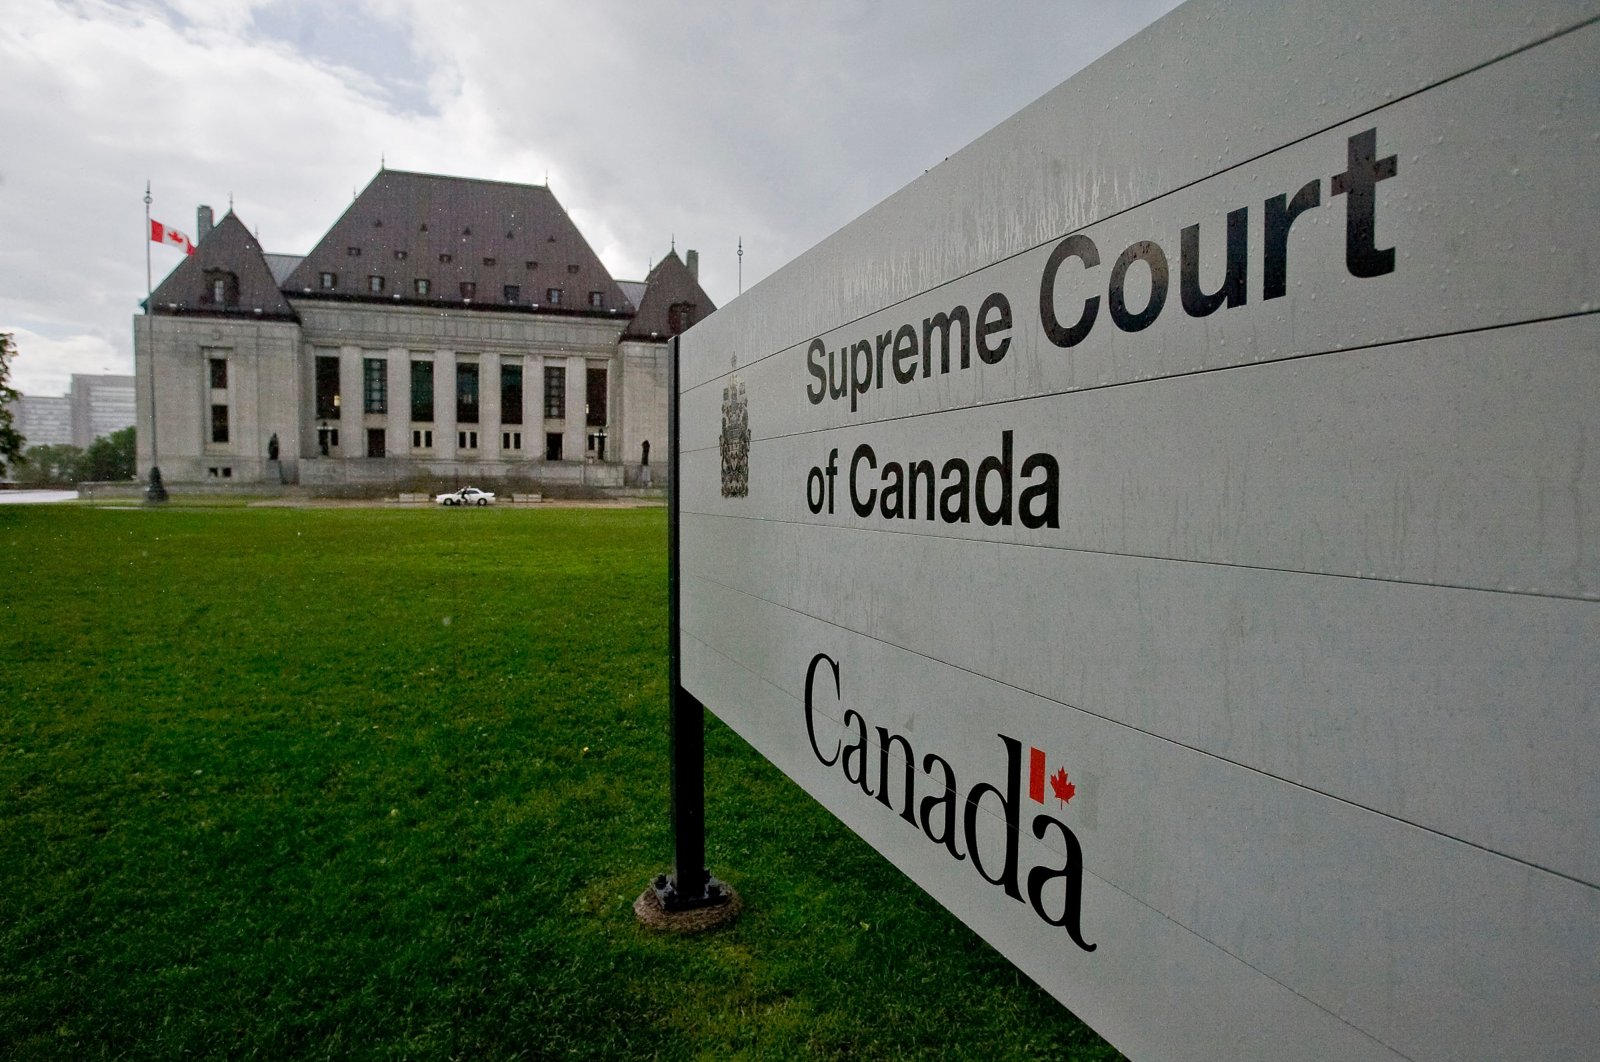 The Supreme Court of Canada on May 27, 2022, ruled that life sentences without the possibility of parole for mass murderers are "unconstitutional," Ottawa, Ontario, Canada, June 20, 2008. (AFP File Photo)